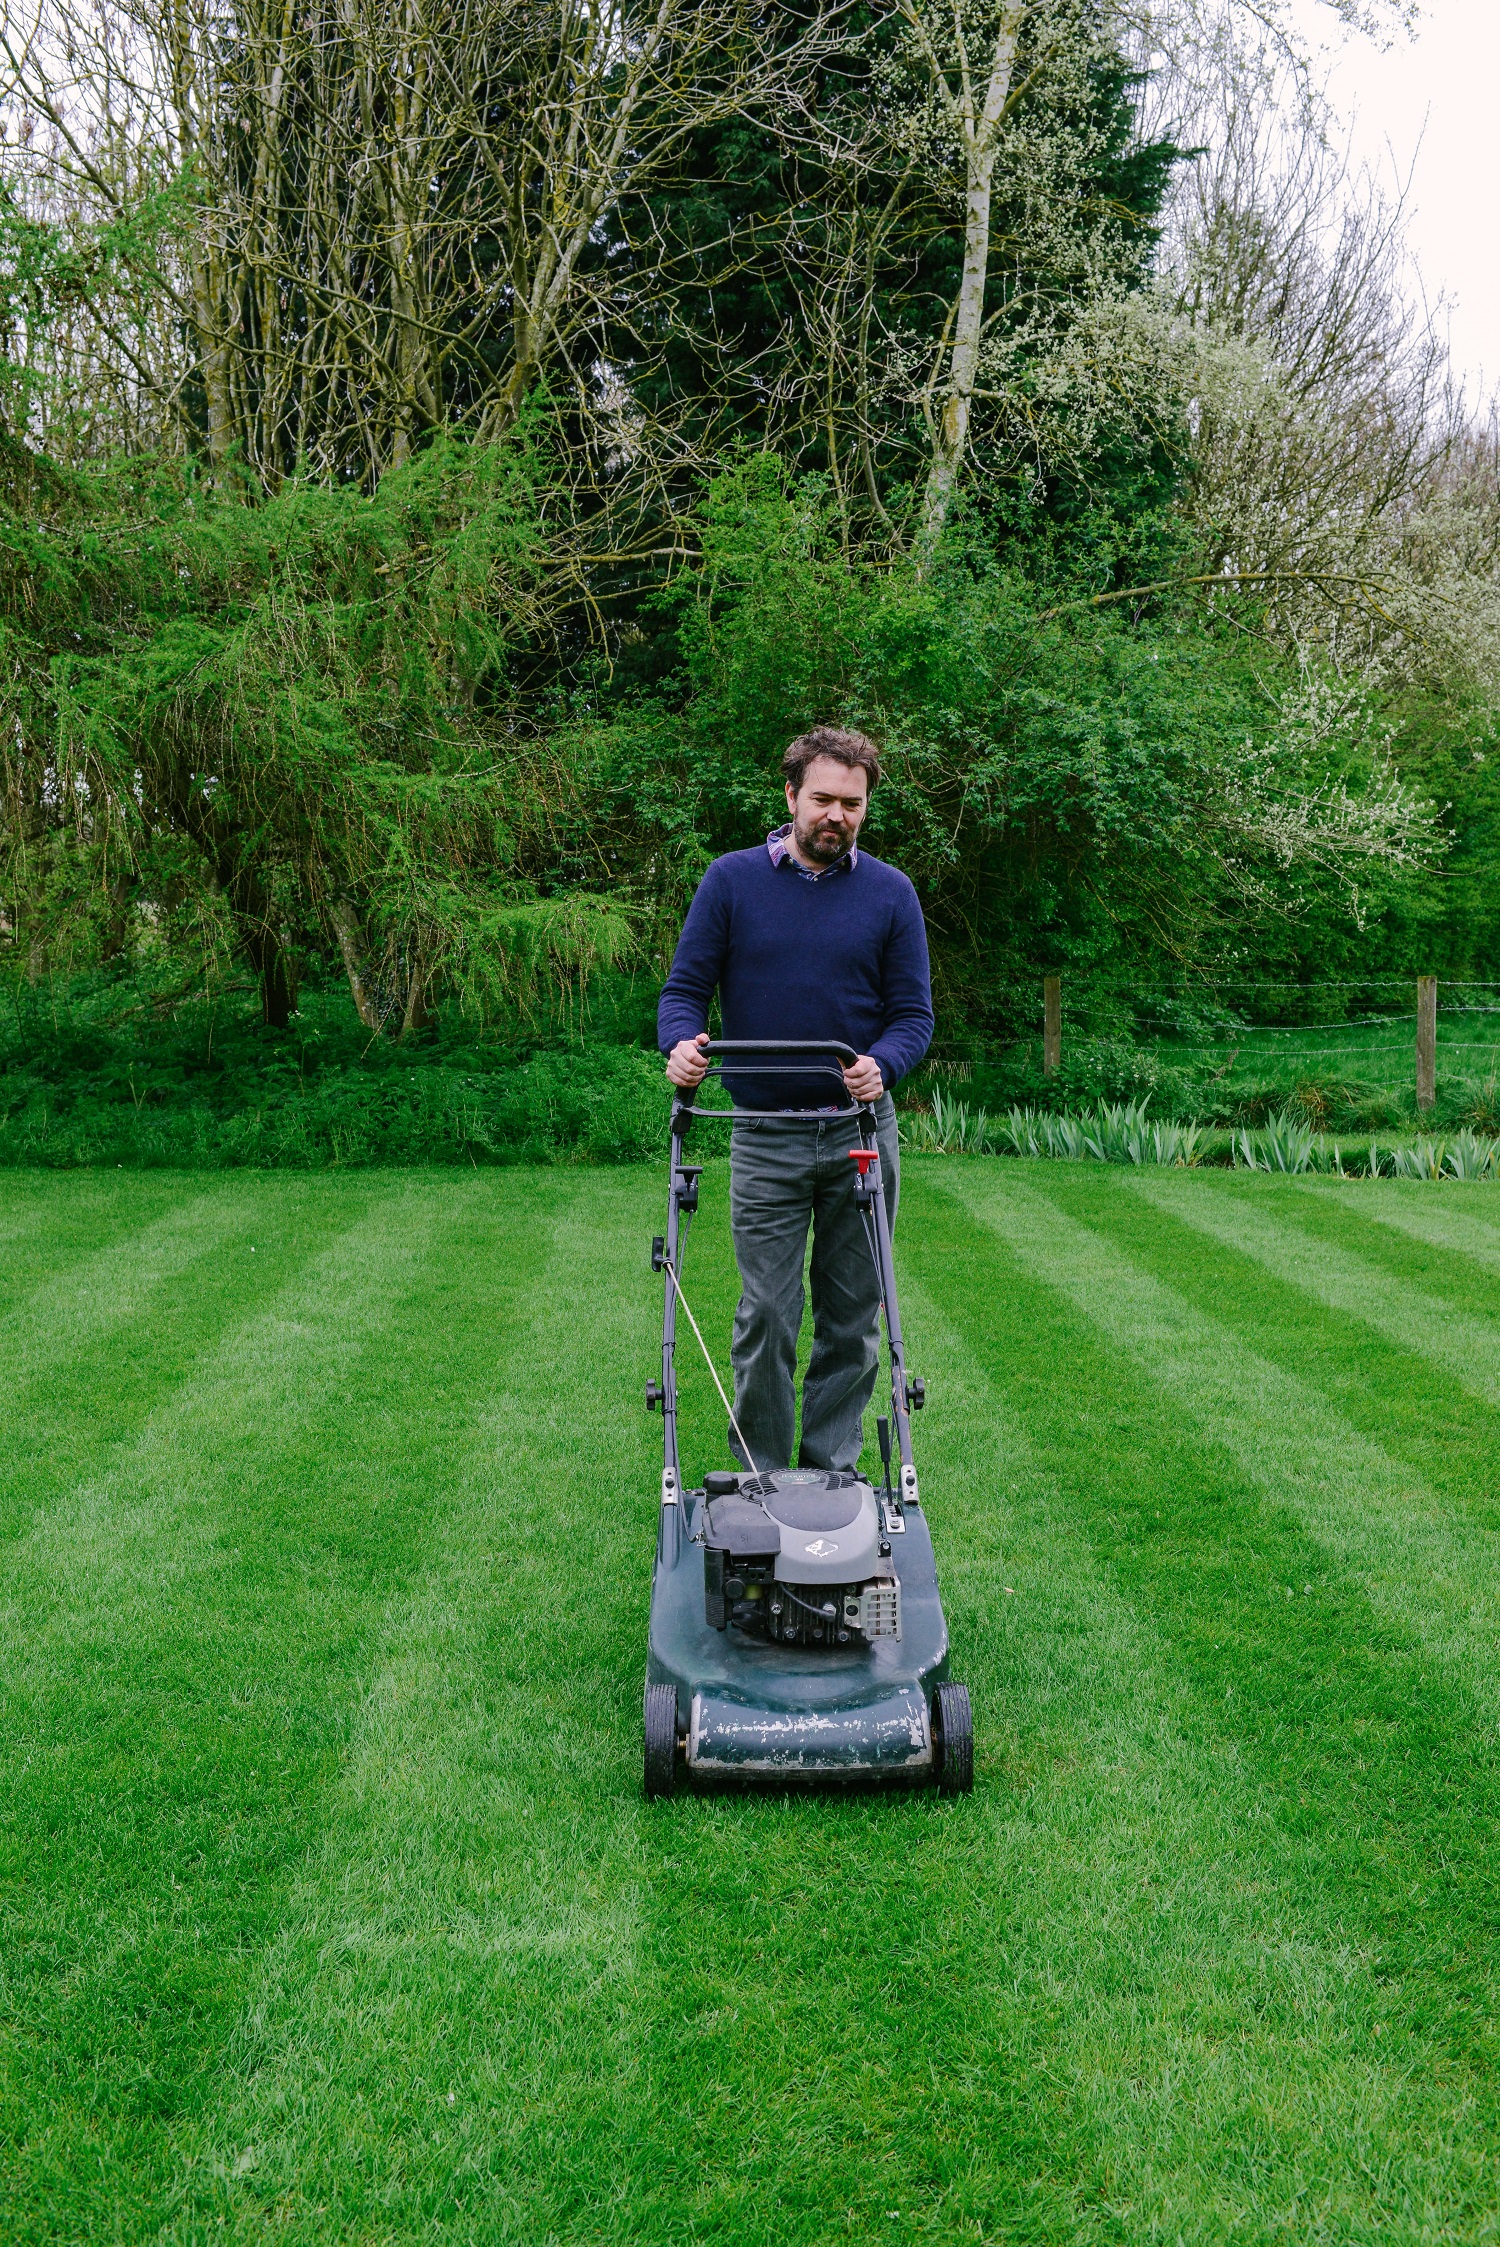 Mow less frequently and set blades higher (David Hedges-Gower/PA)